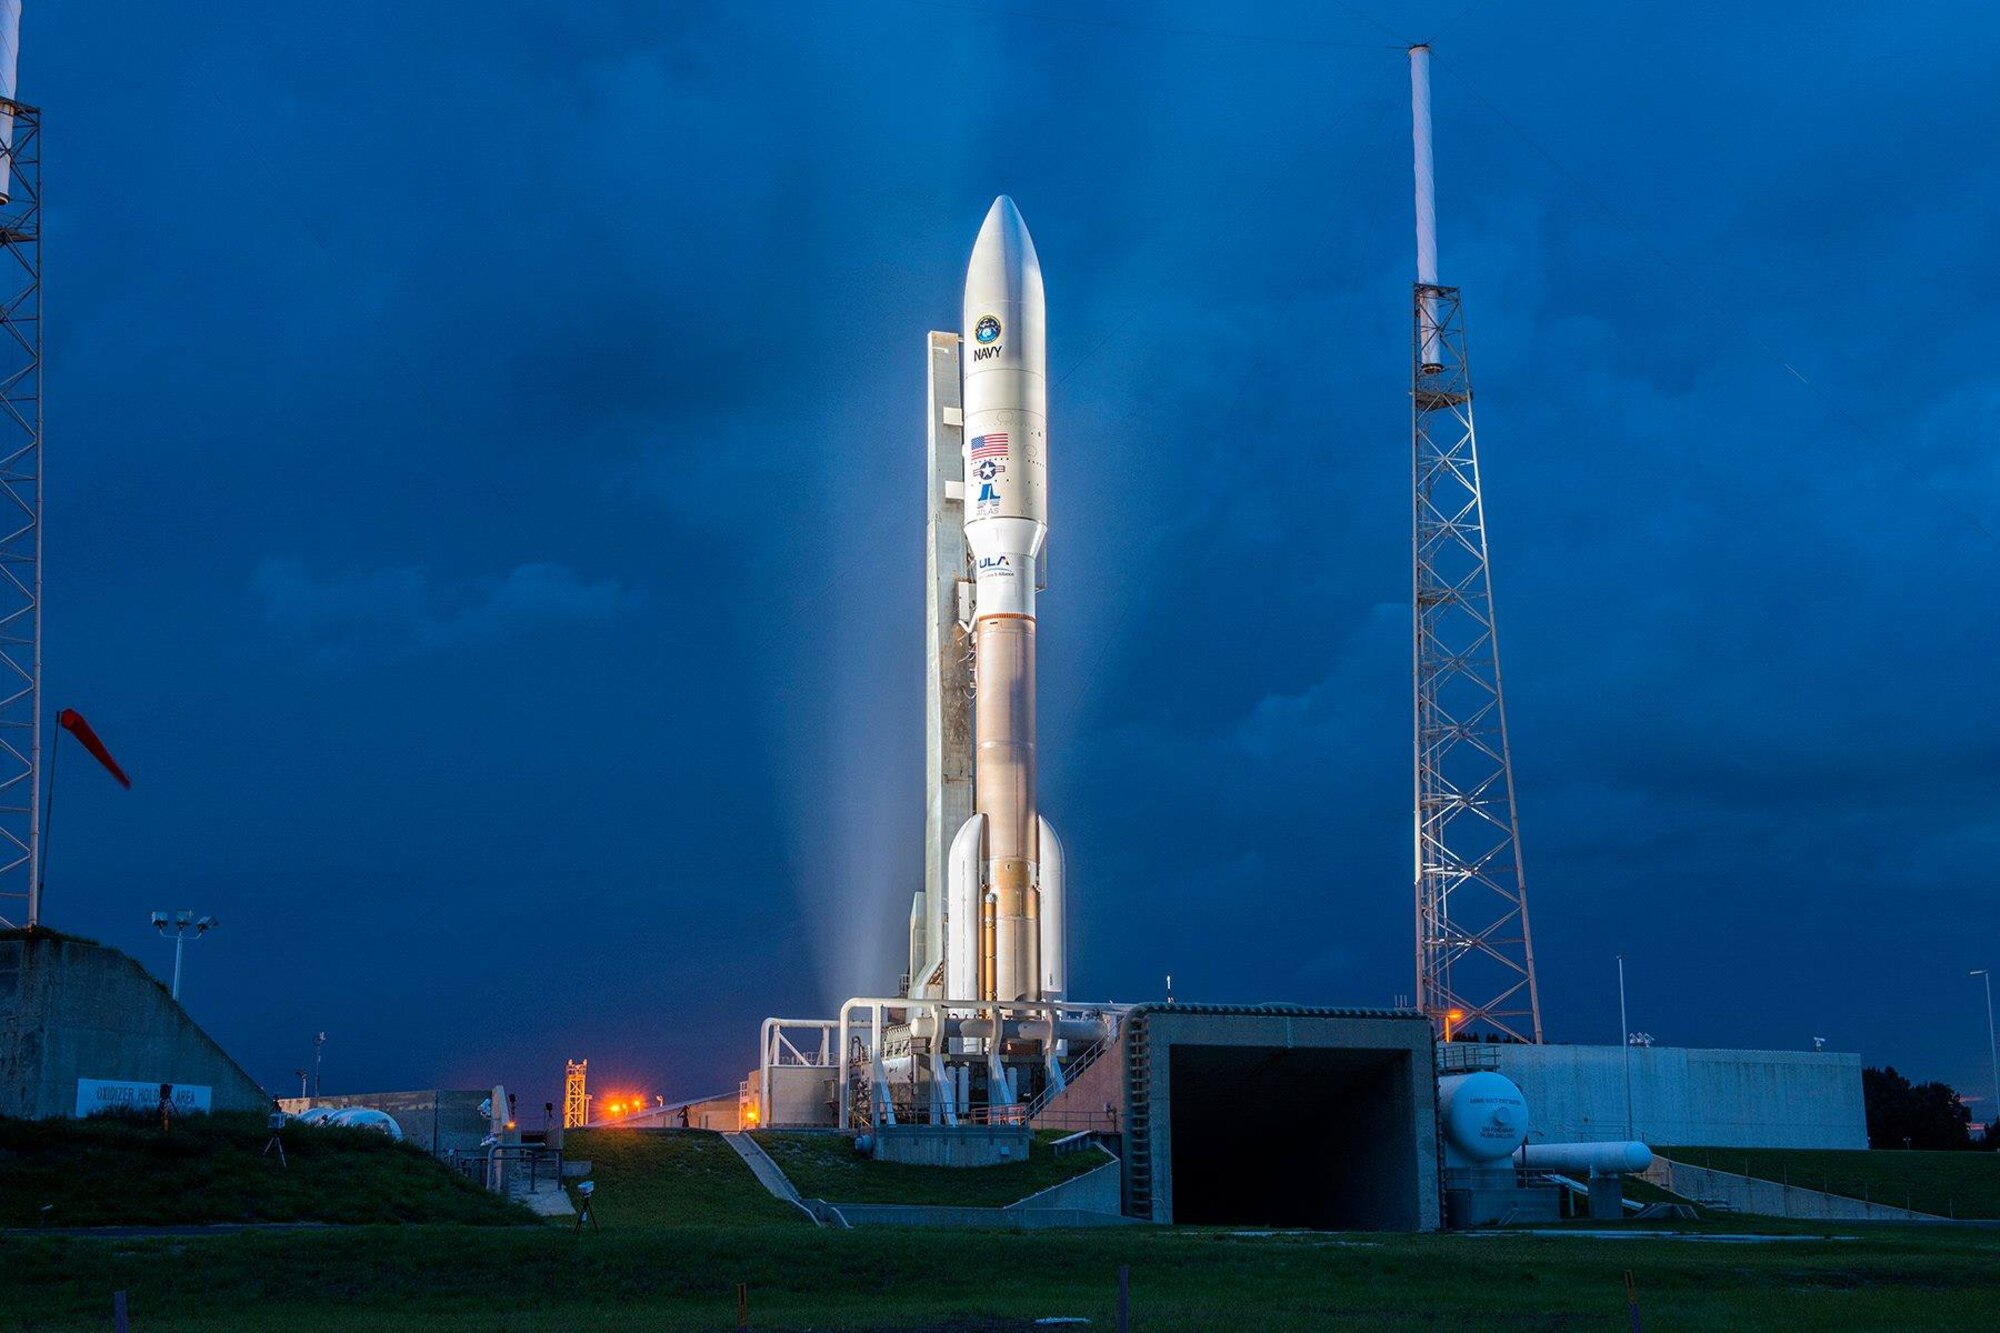 The 45th Space Wing helped successfully launch the fourth Mobile User Objective System satellite aboard a United Launch Alliance Atlas V rocket Sept. 2, 2015, from Cape Canaveral Air Force Station, Fla. The Navy-delivered MUOS is a next-generation narrowband tactical satellite communications system, built by Lockheed Martin and designed to significantly improve ground communications for U.S. forces on the move. (United Launch Alliance courtesy photo) 